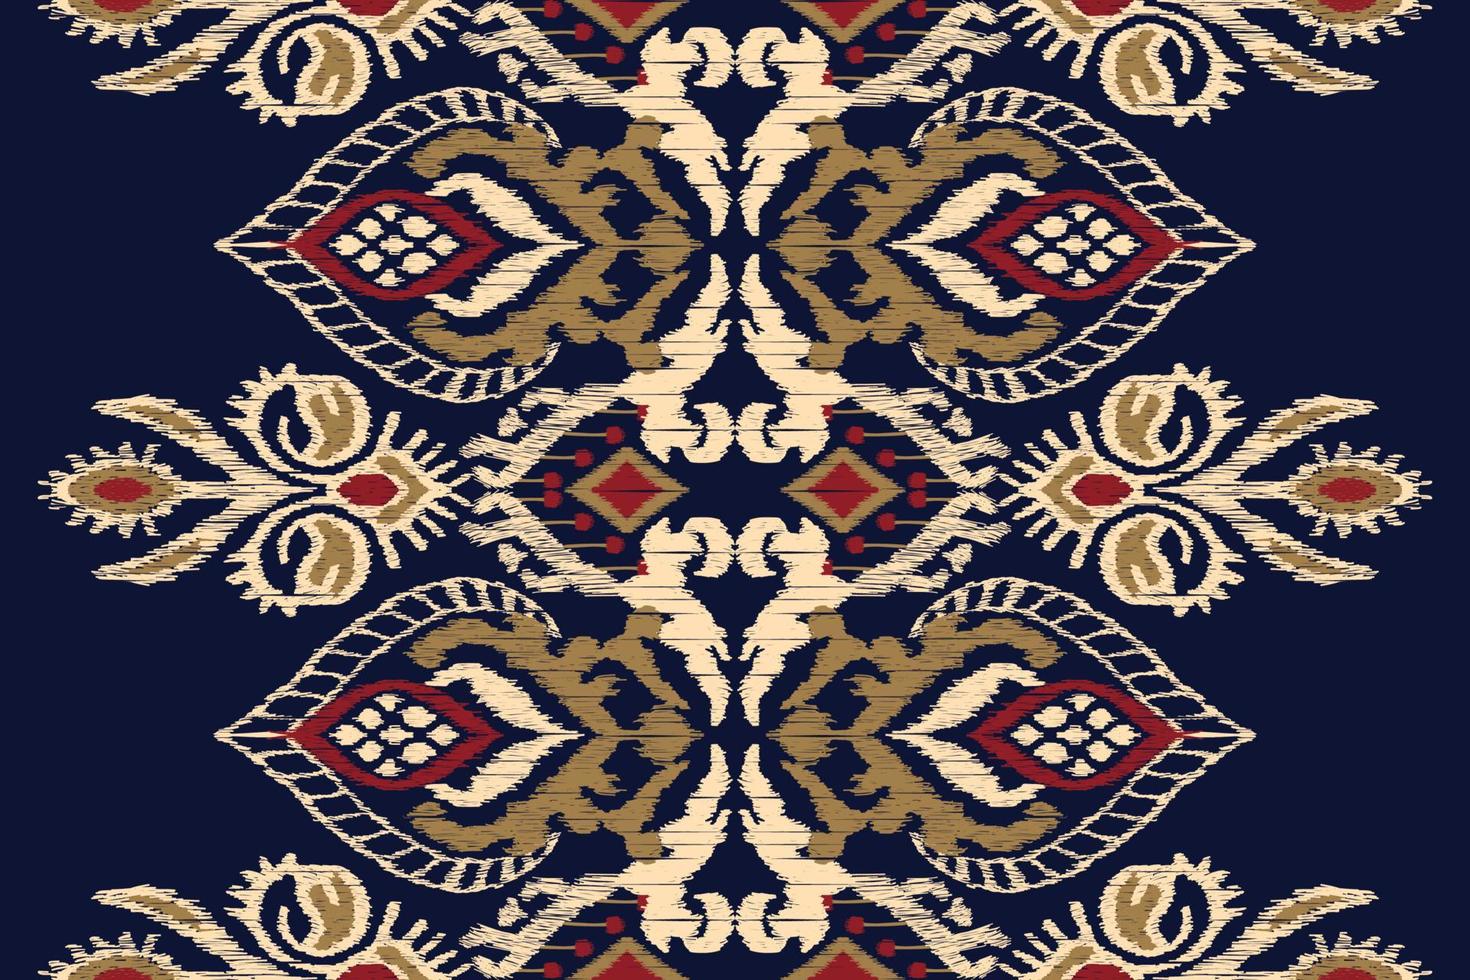 Ikat floral paisley embroidery on navy blue background.geometric ethnic oriental pattern traditional.Aztec style abstract vector illustration.design for texture,fabric,clothing,wrapping,decoration.